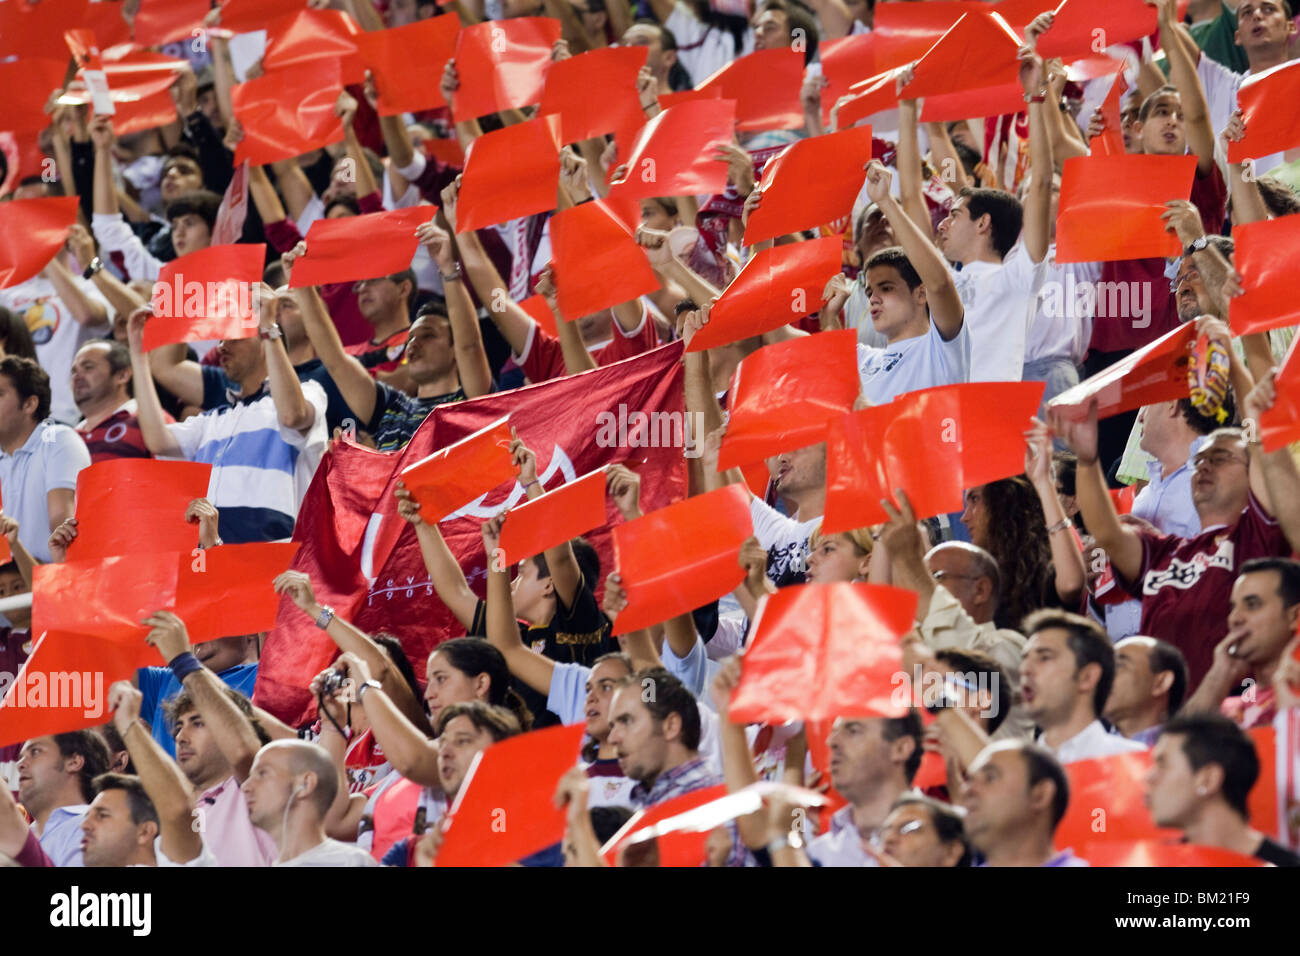 Sevilla FC fans doing a tifo with colored cards. Stock Photo